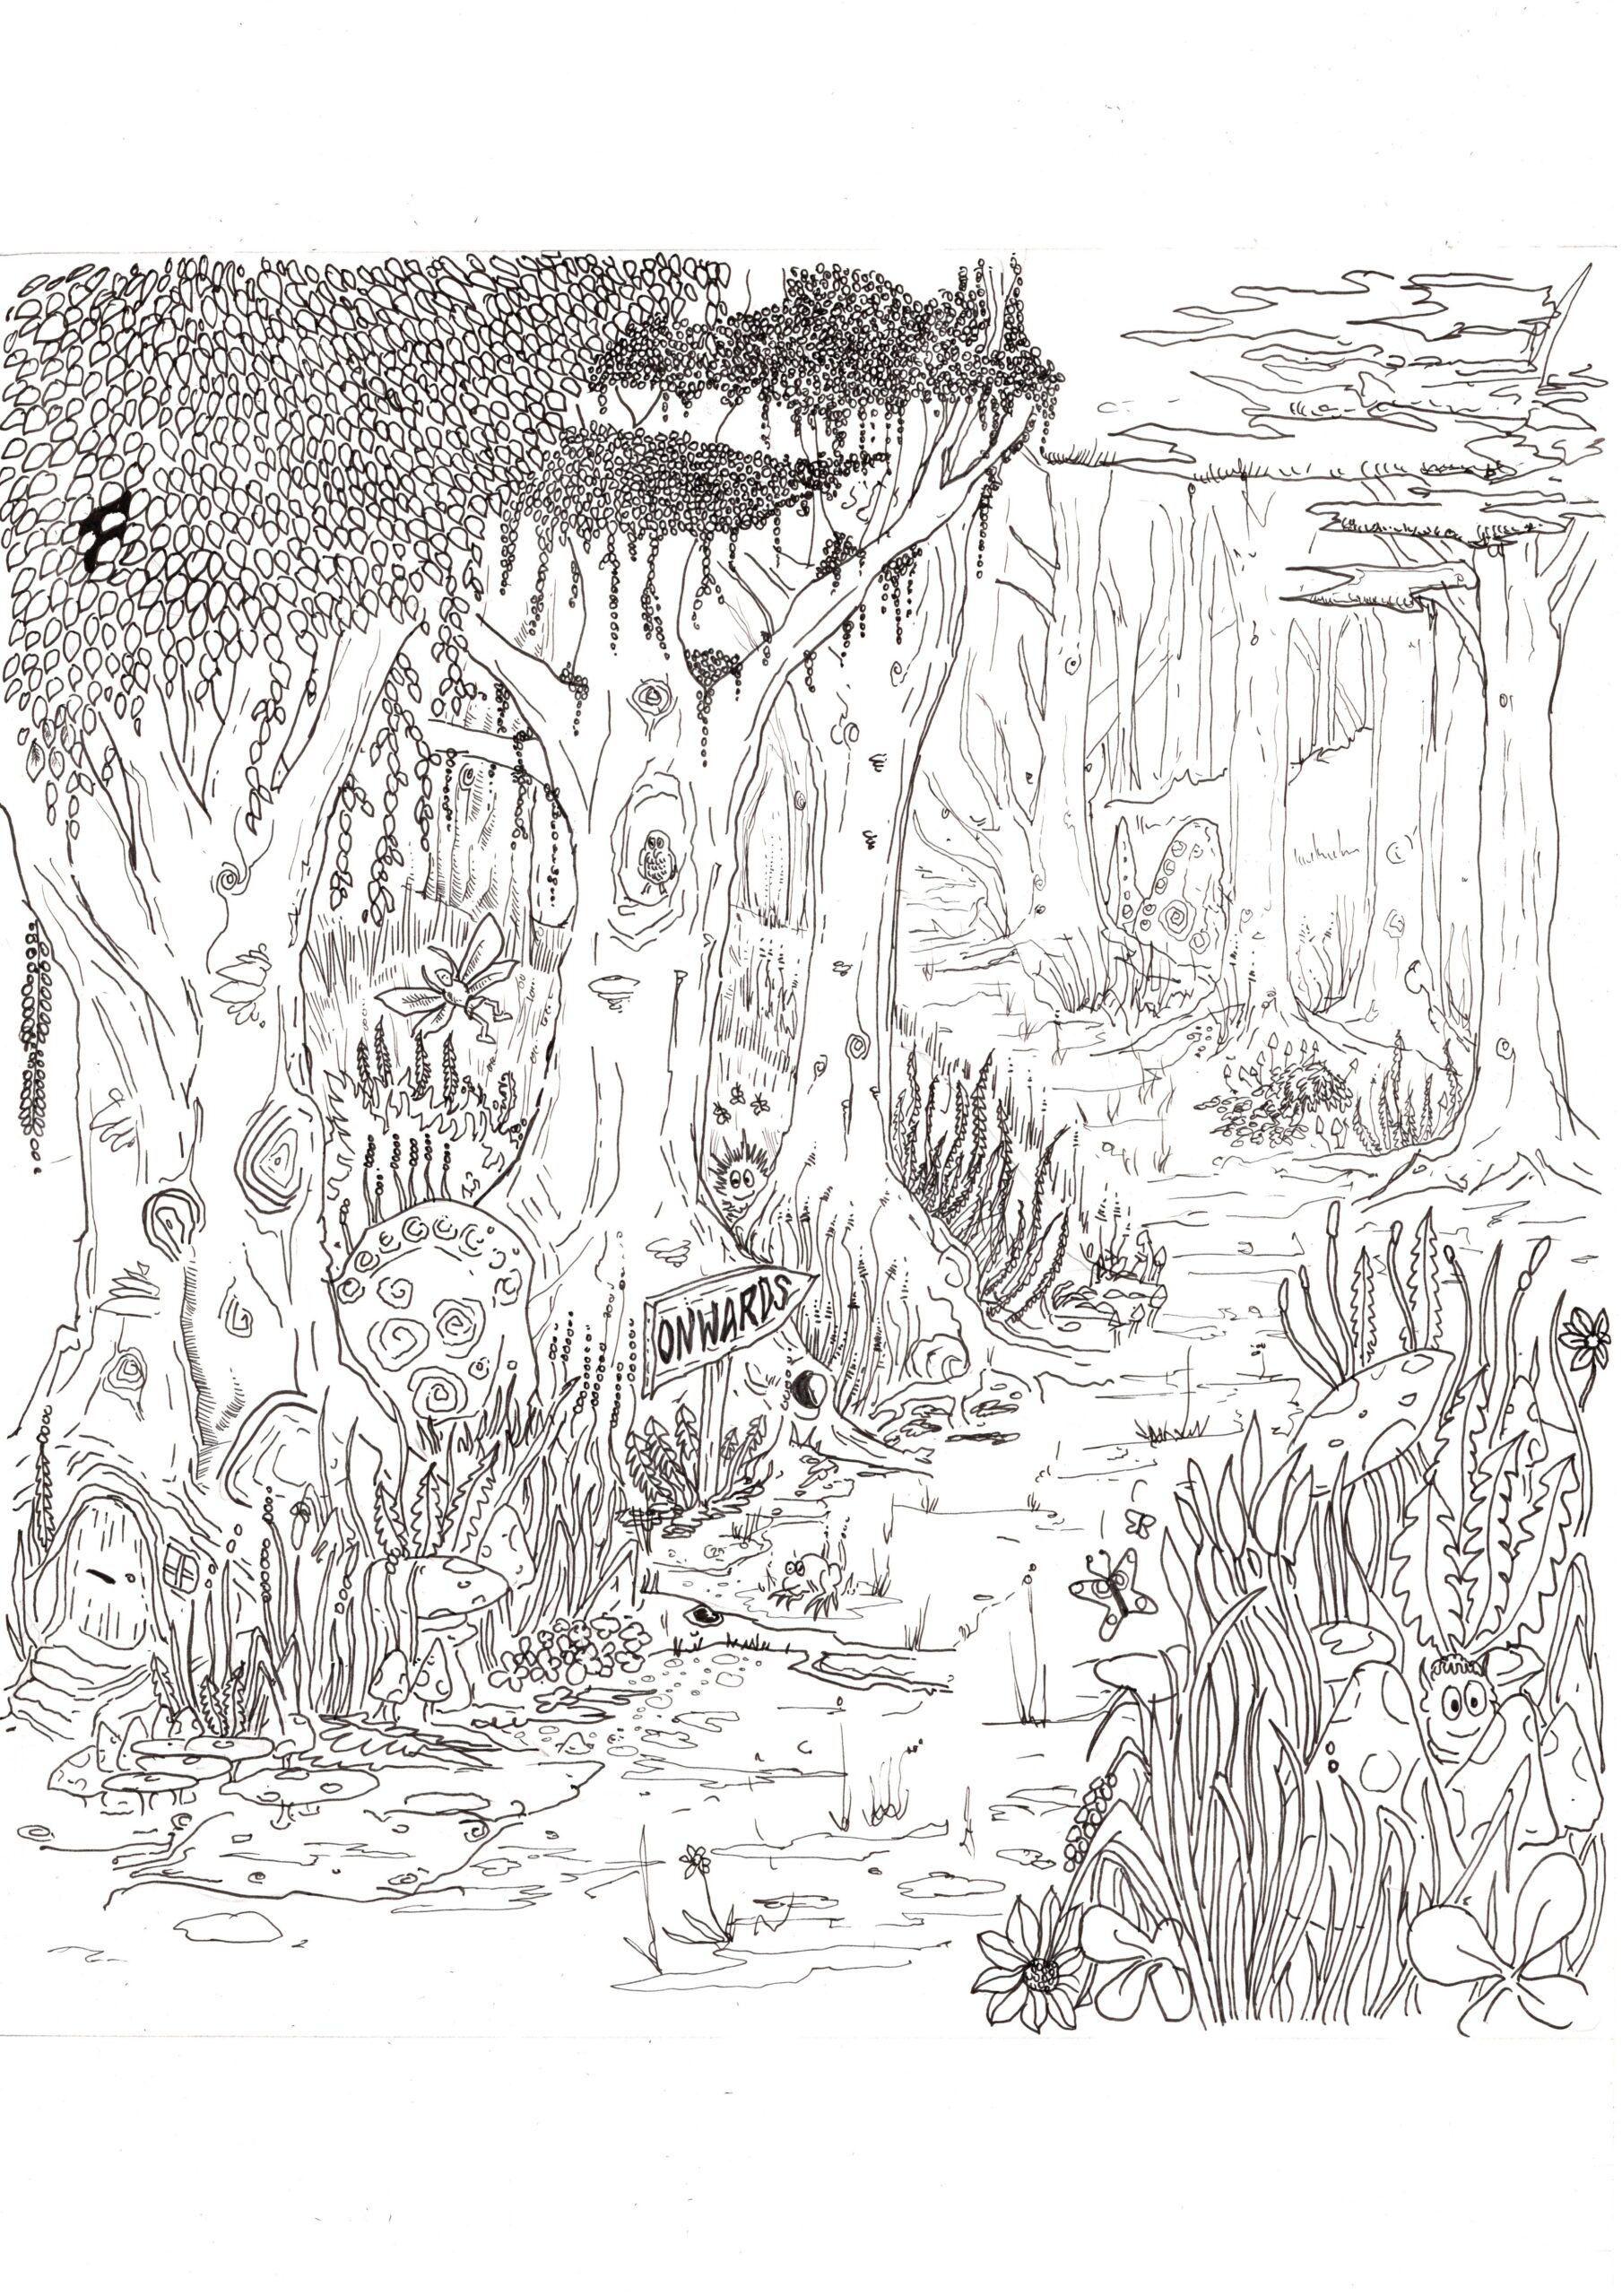 A path in a forest, drawn in black and white.